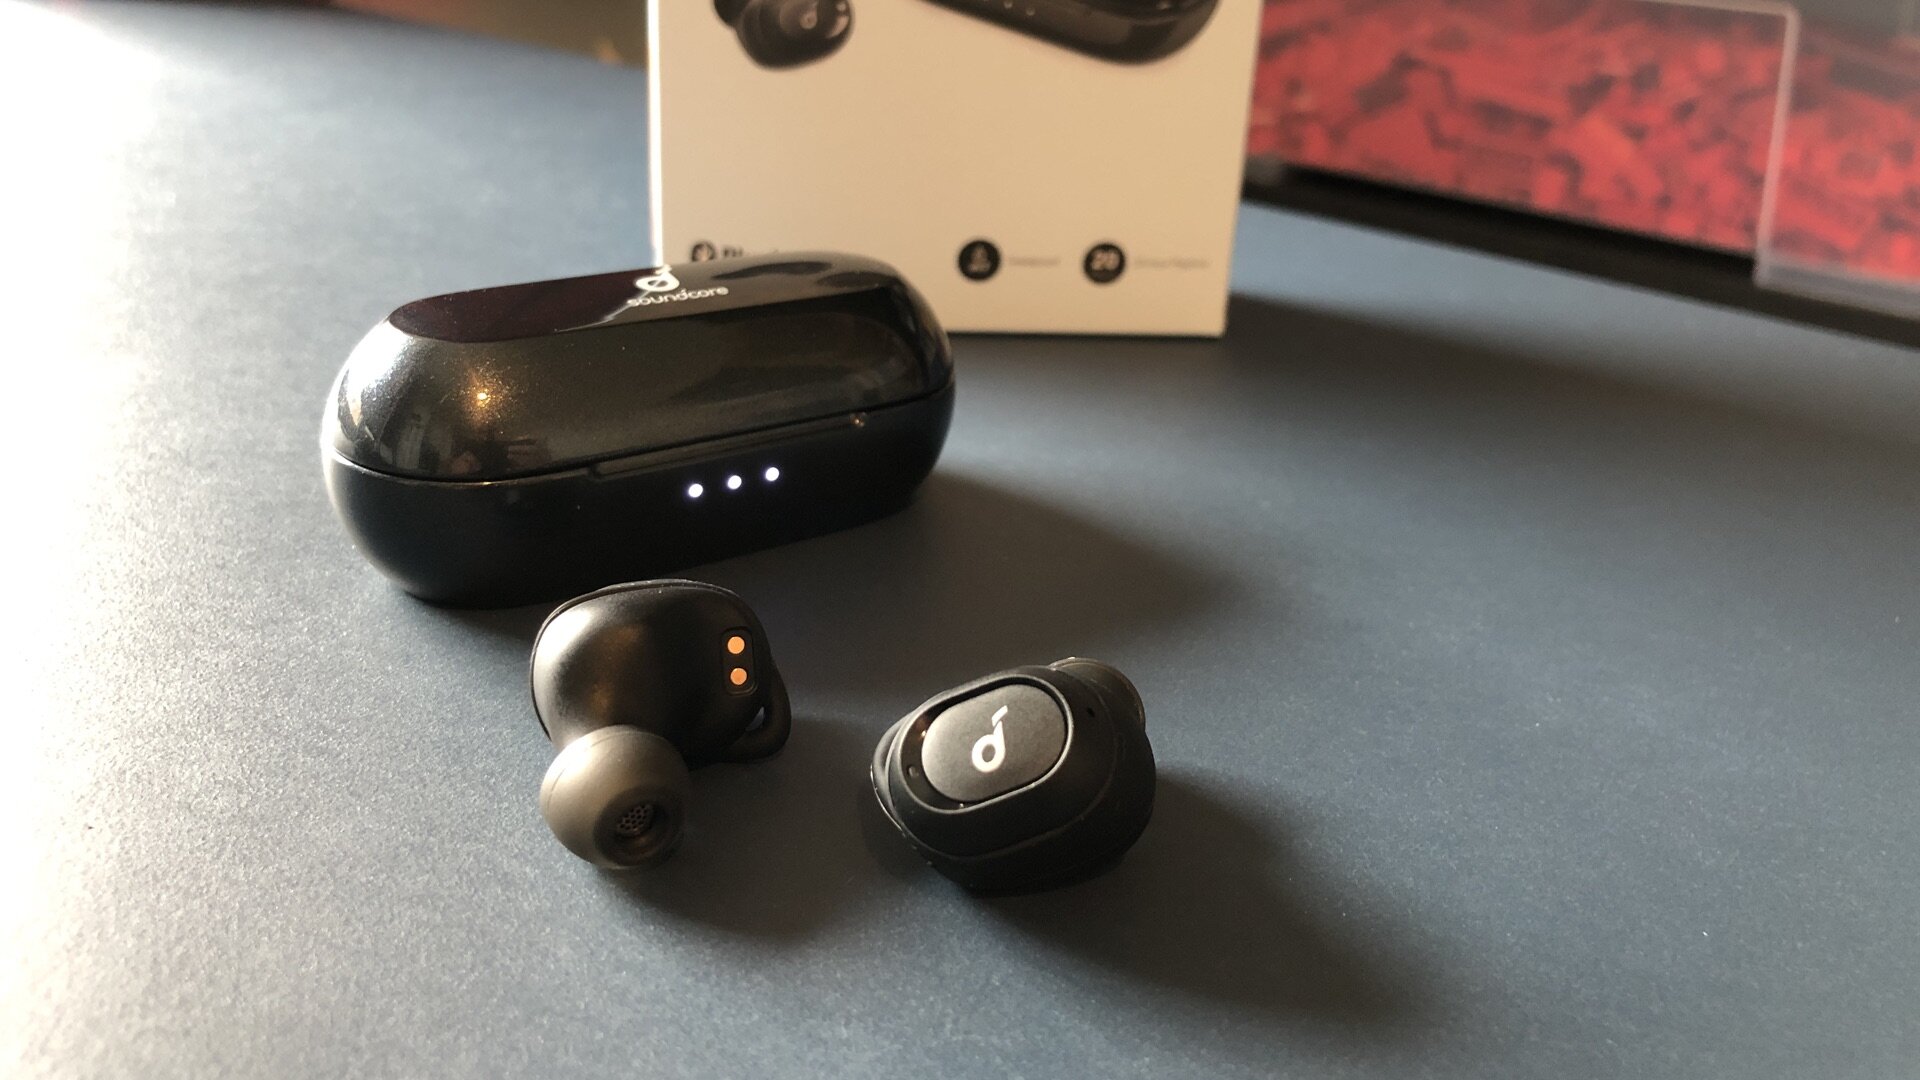 Soundcore review: Still good mid-2020?